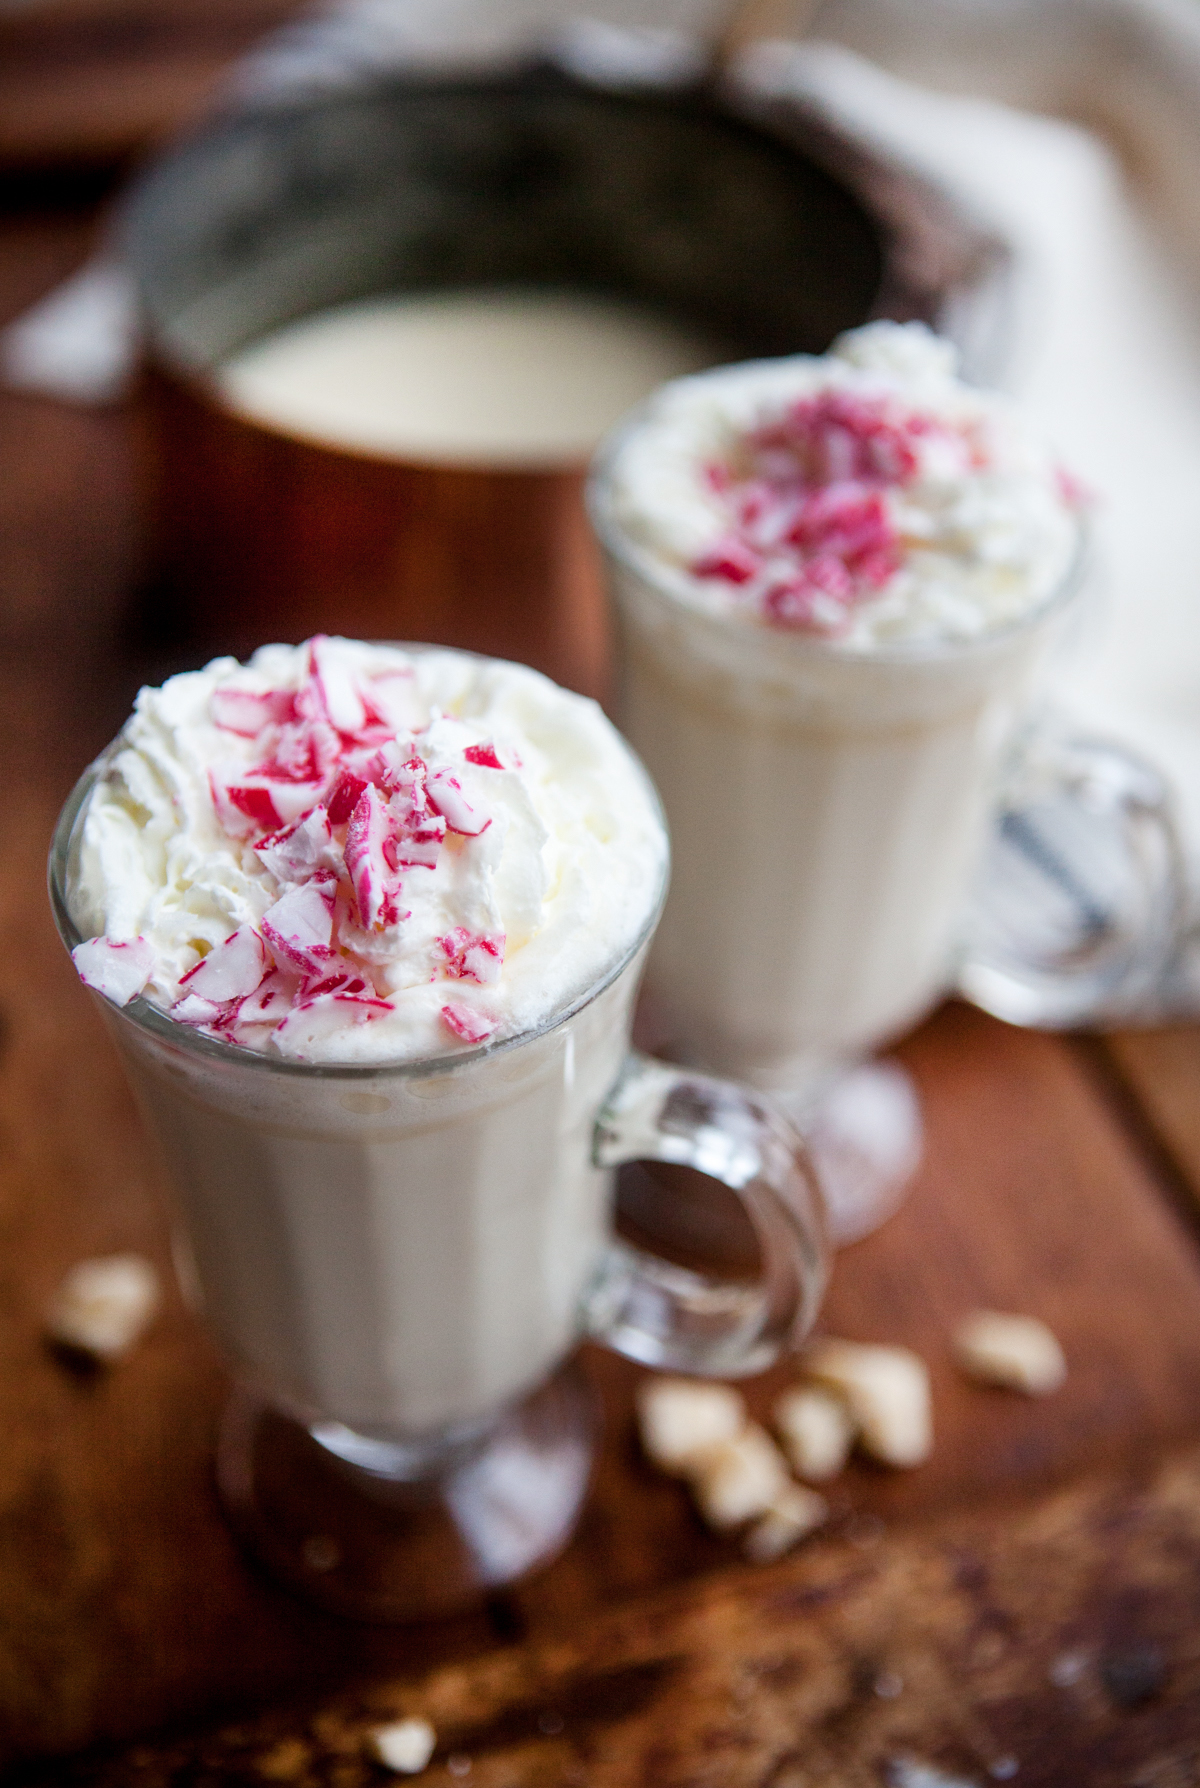 Candy Cane Hot Chocolate - Quick and Easy Recipe